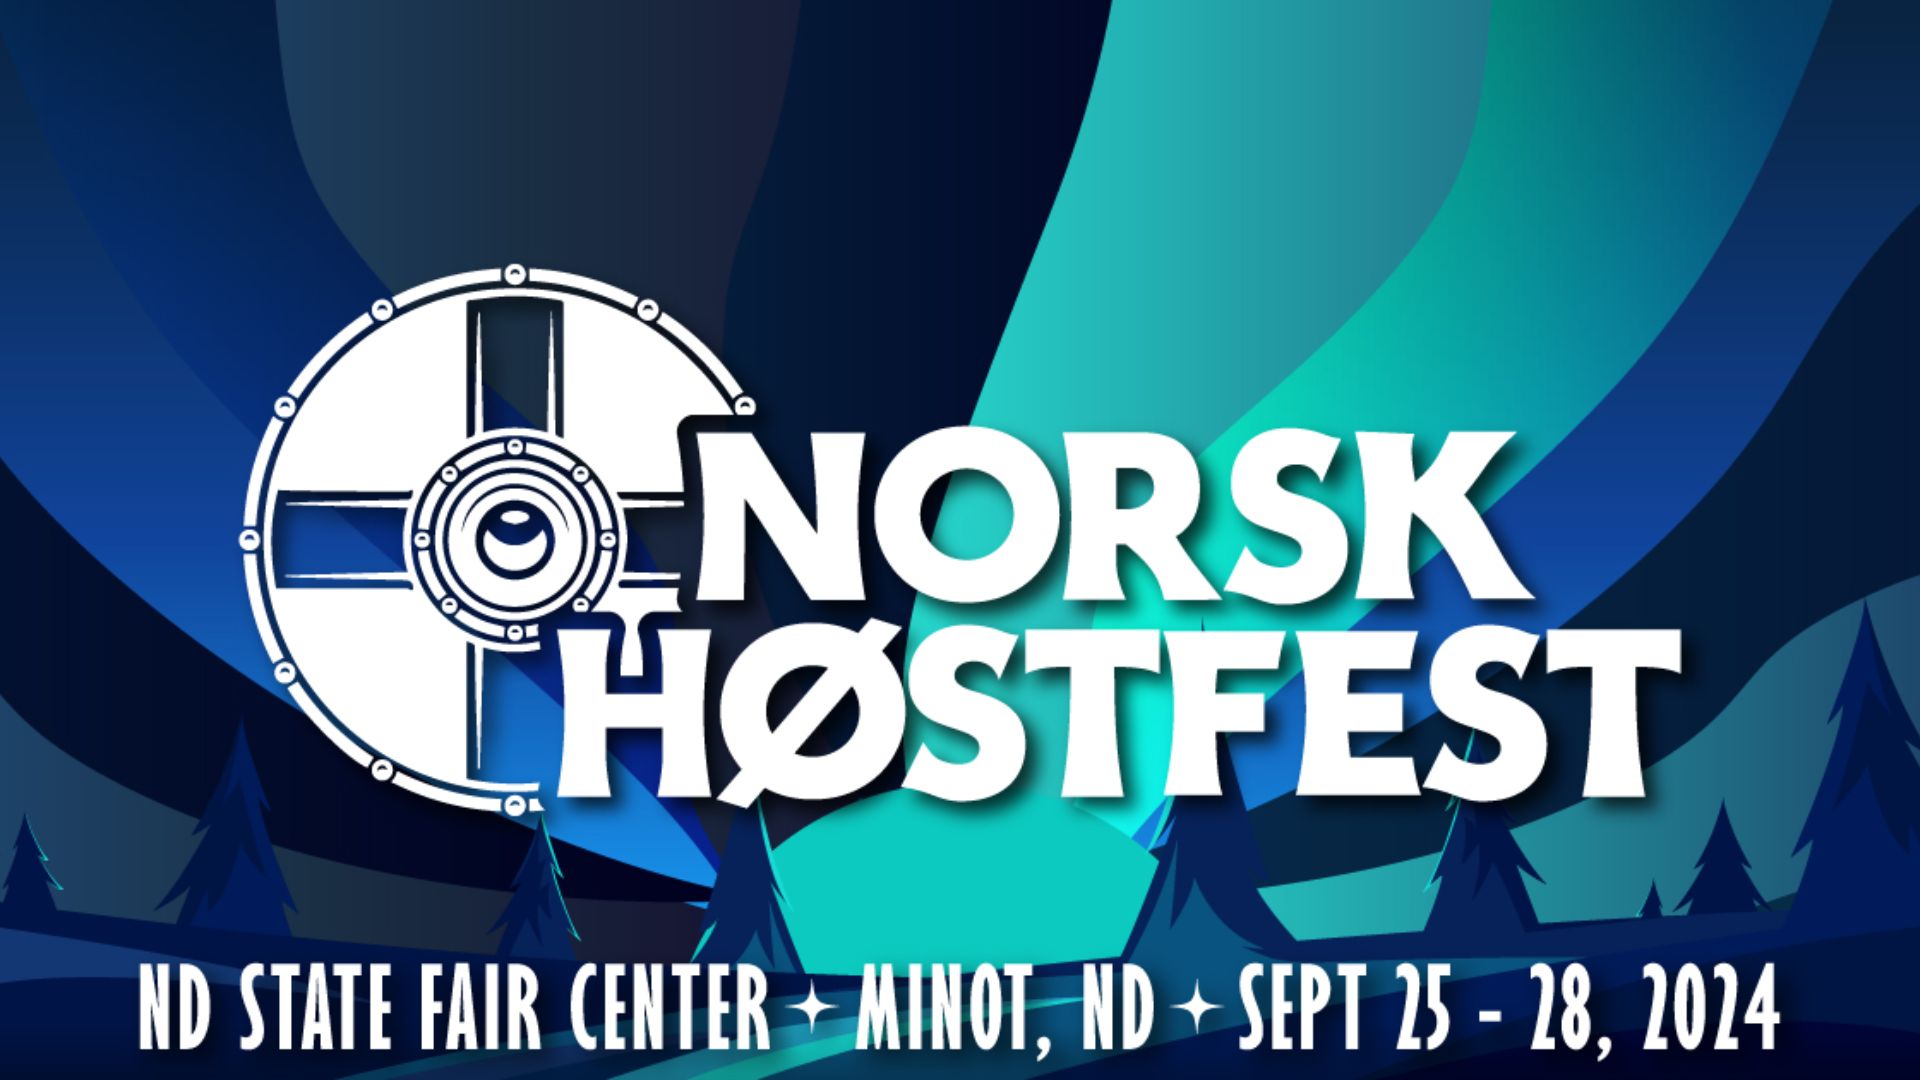 45th Annual Norsk Hostfest